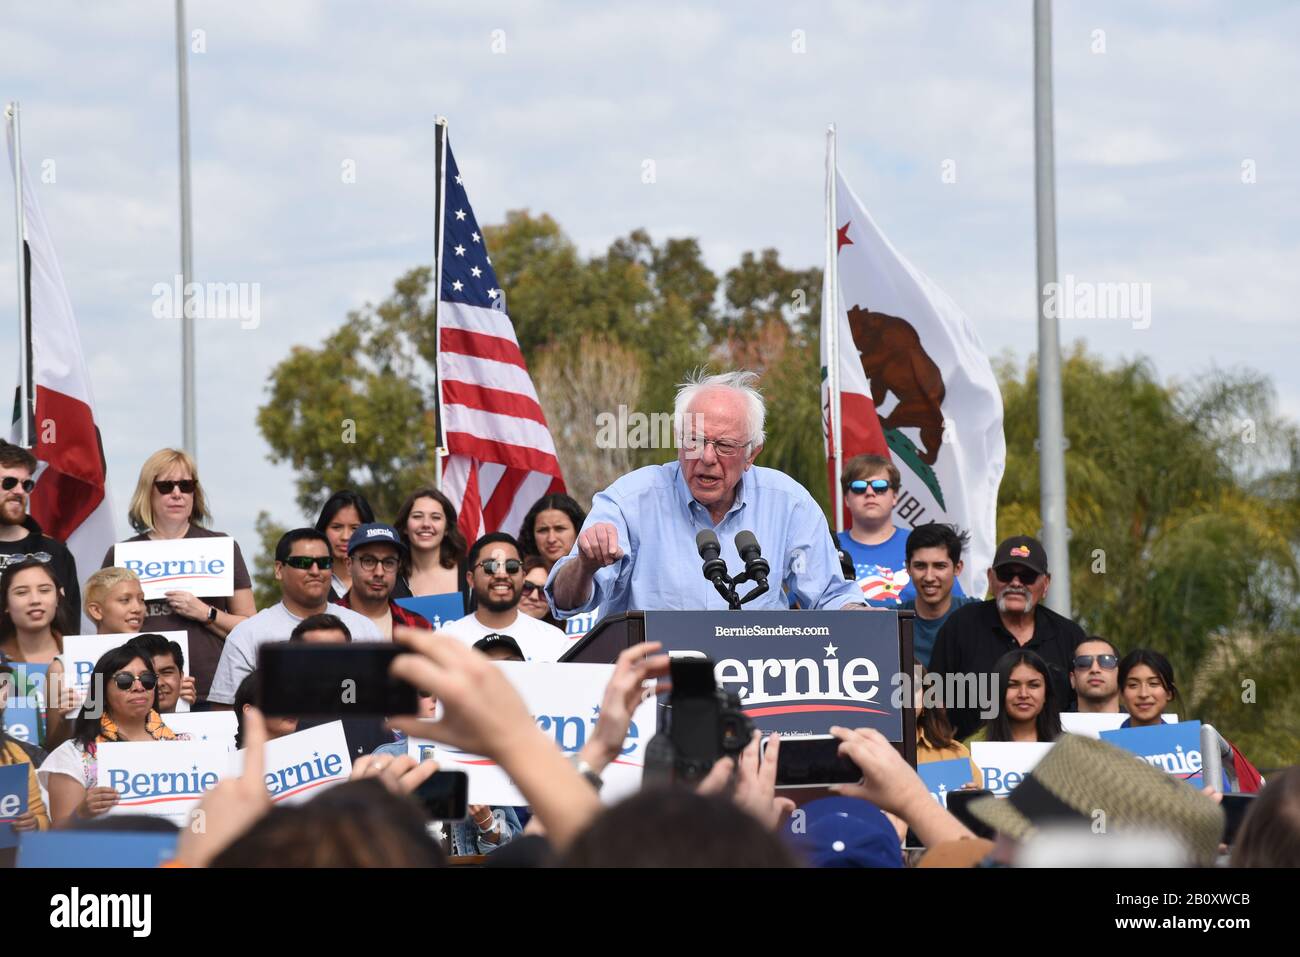 SANTA ANA, CALIFORNIA - 21 FEB 2020: Bernie Sanders Rally. Sanders at the podium surrounded by supporters at an outdoor rally. Stock Photo